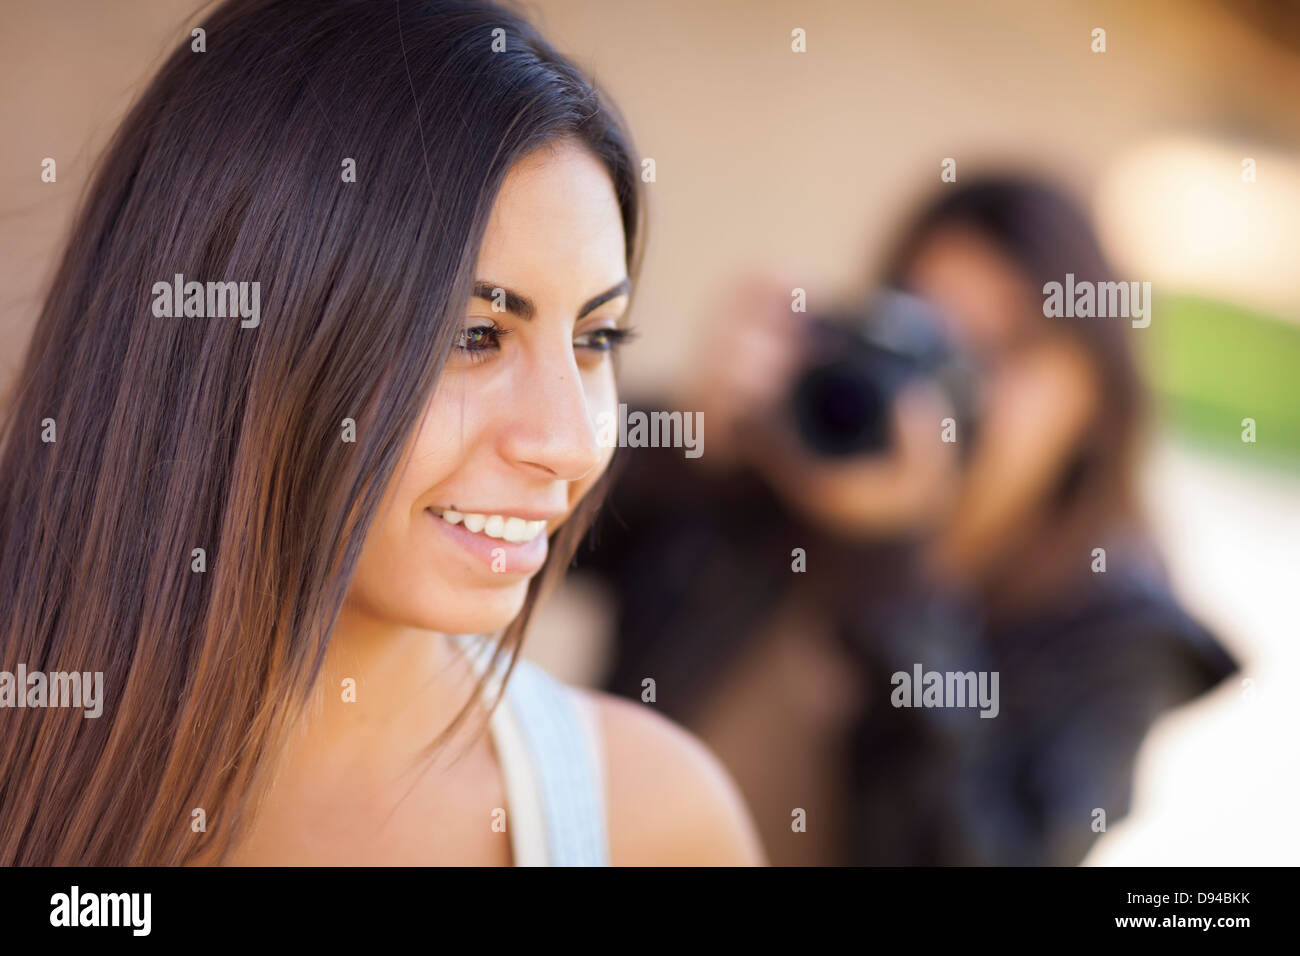 Attractive Young Adult Mixed Race Female Model Poses for a Photographer Outside. Stock Photo